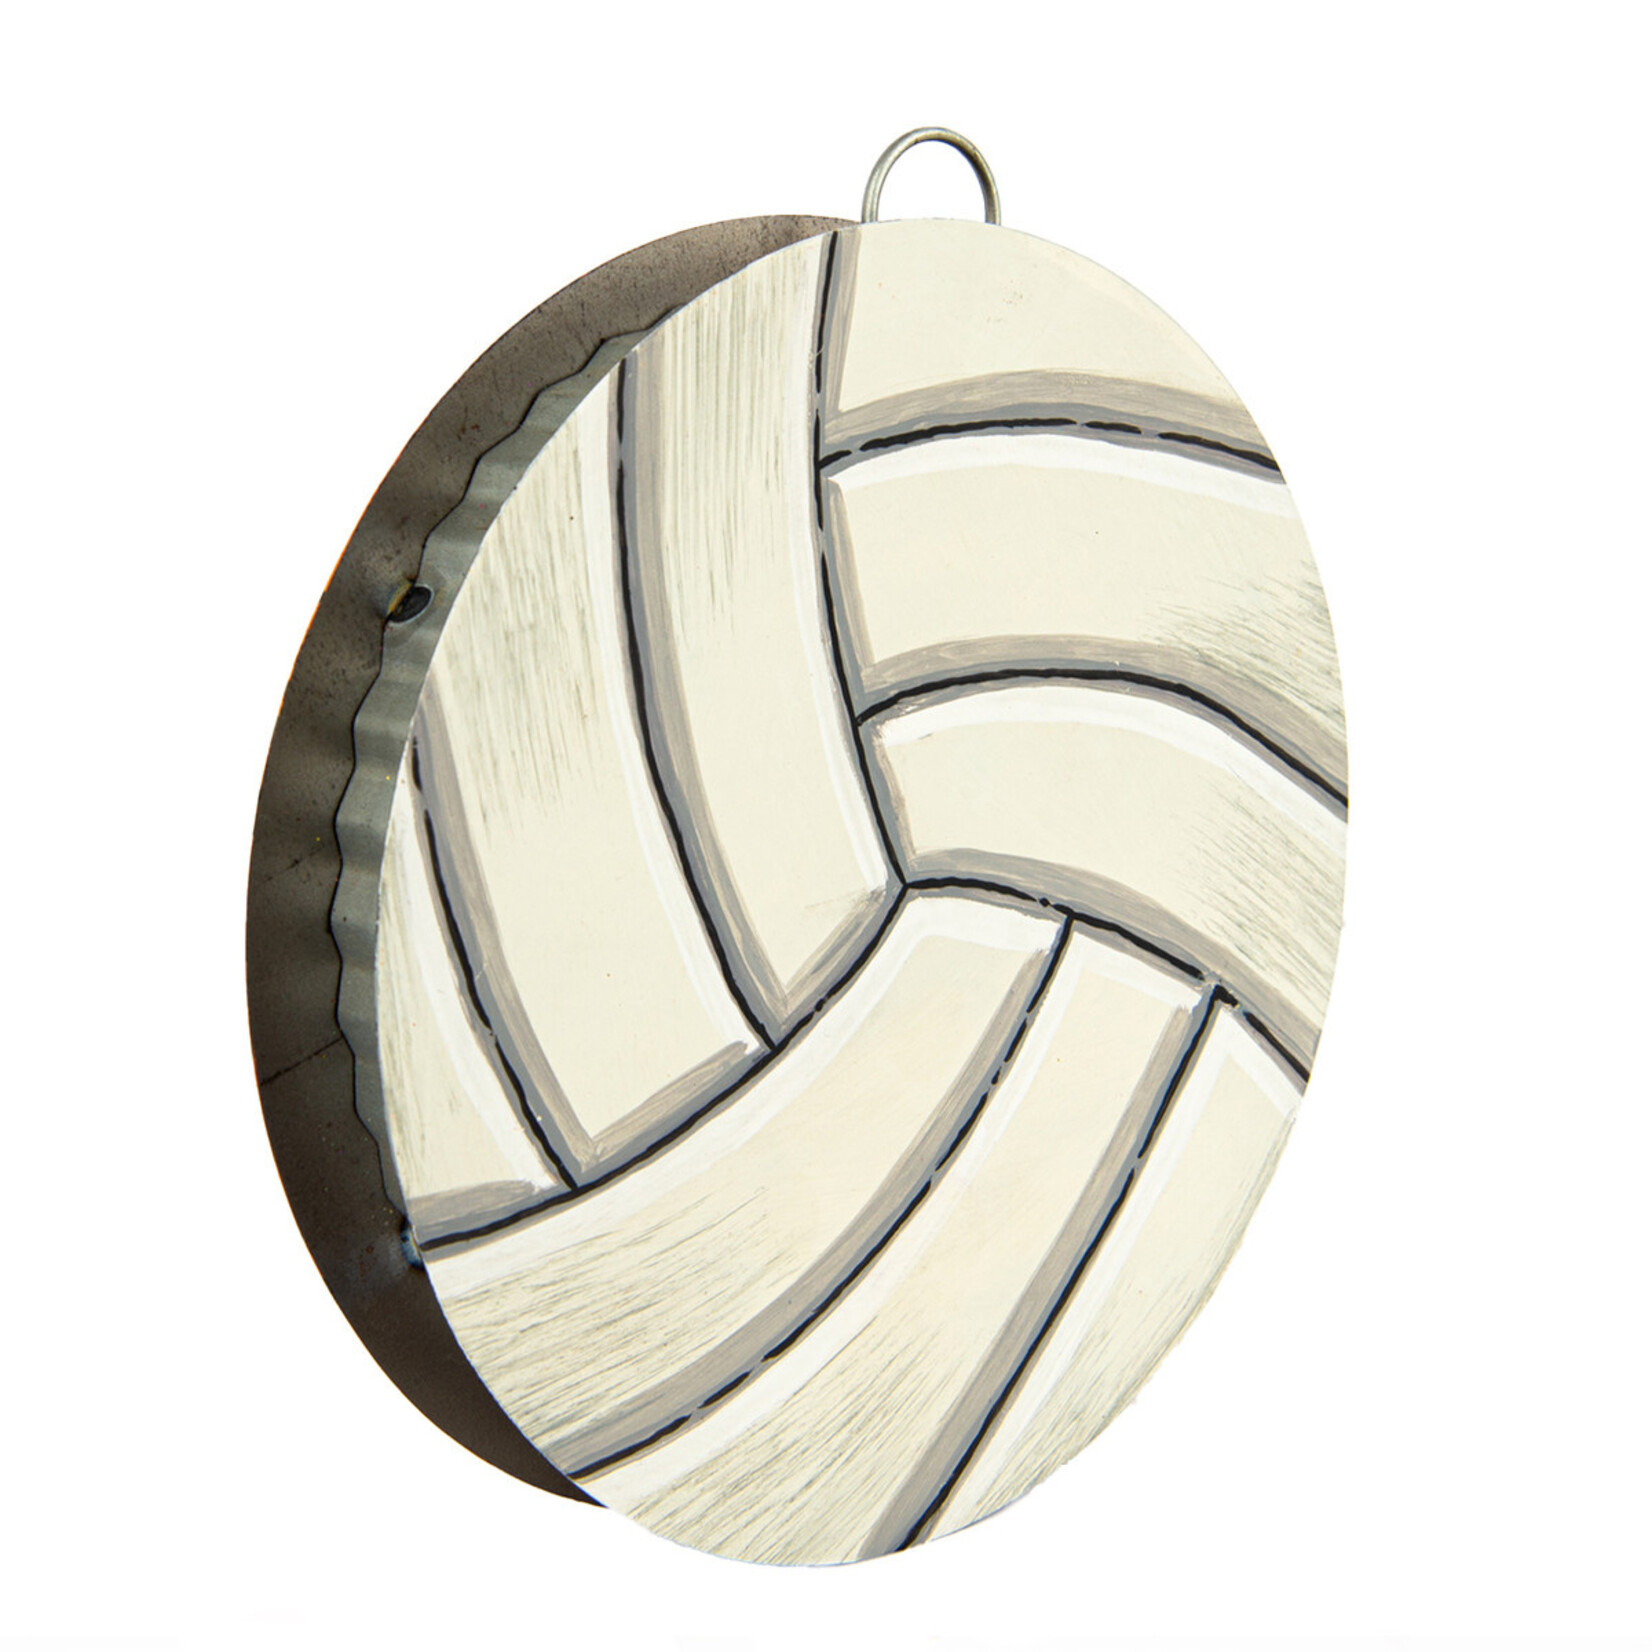 Round Top Basketball/Volleyball Charm